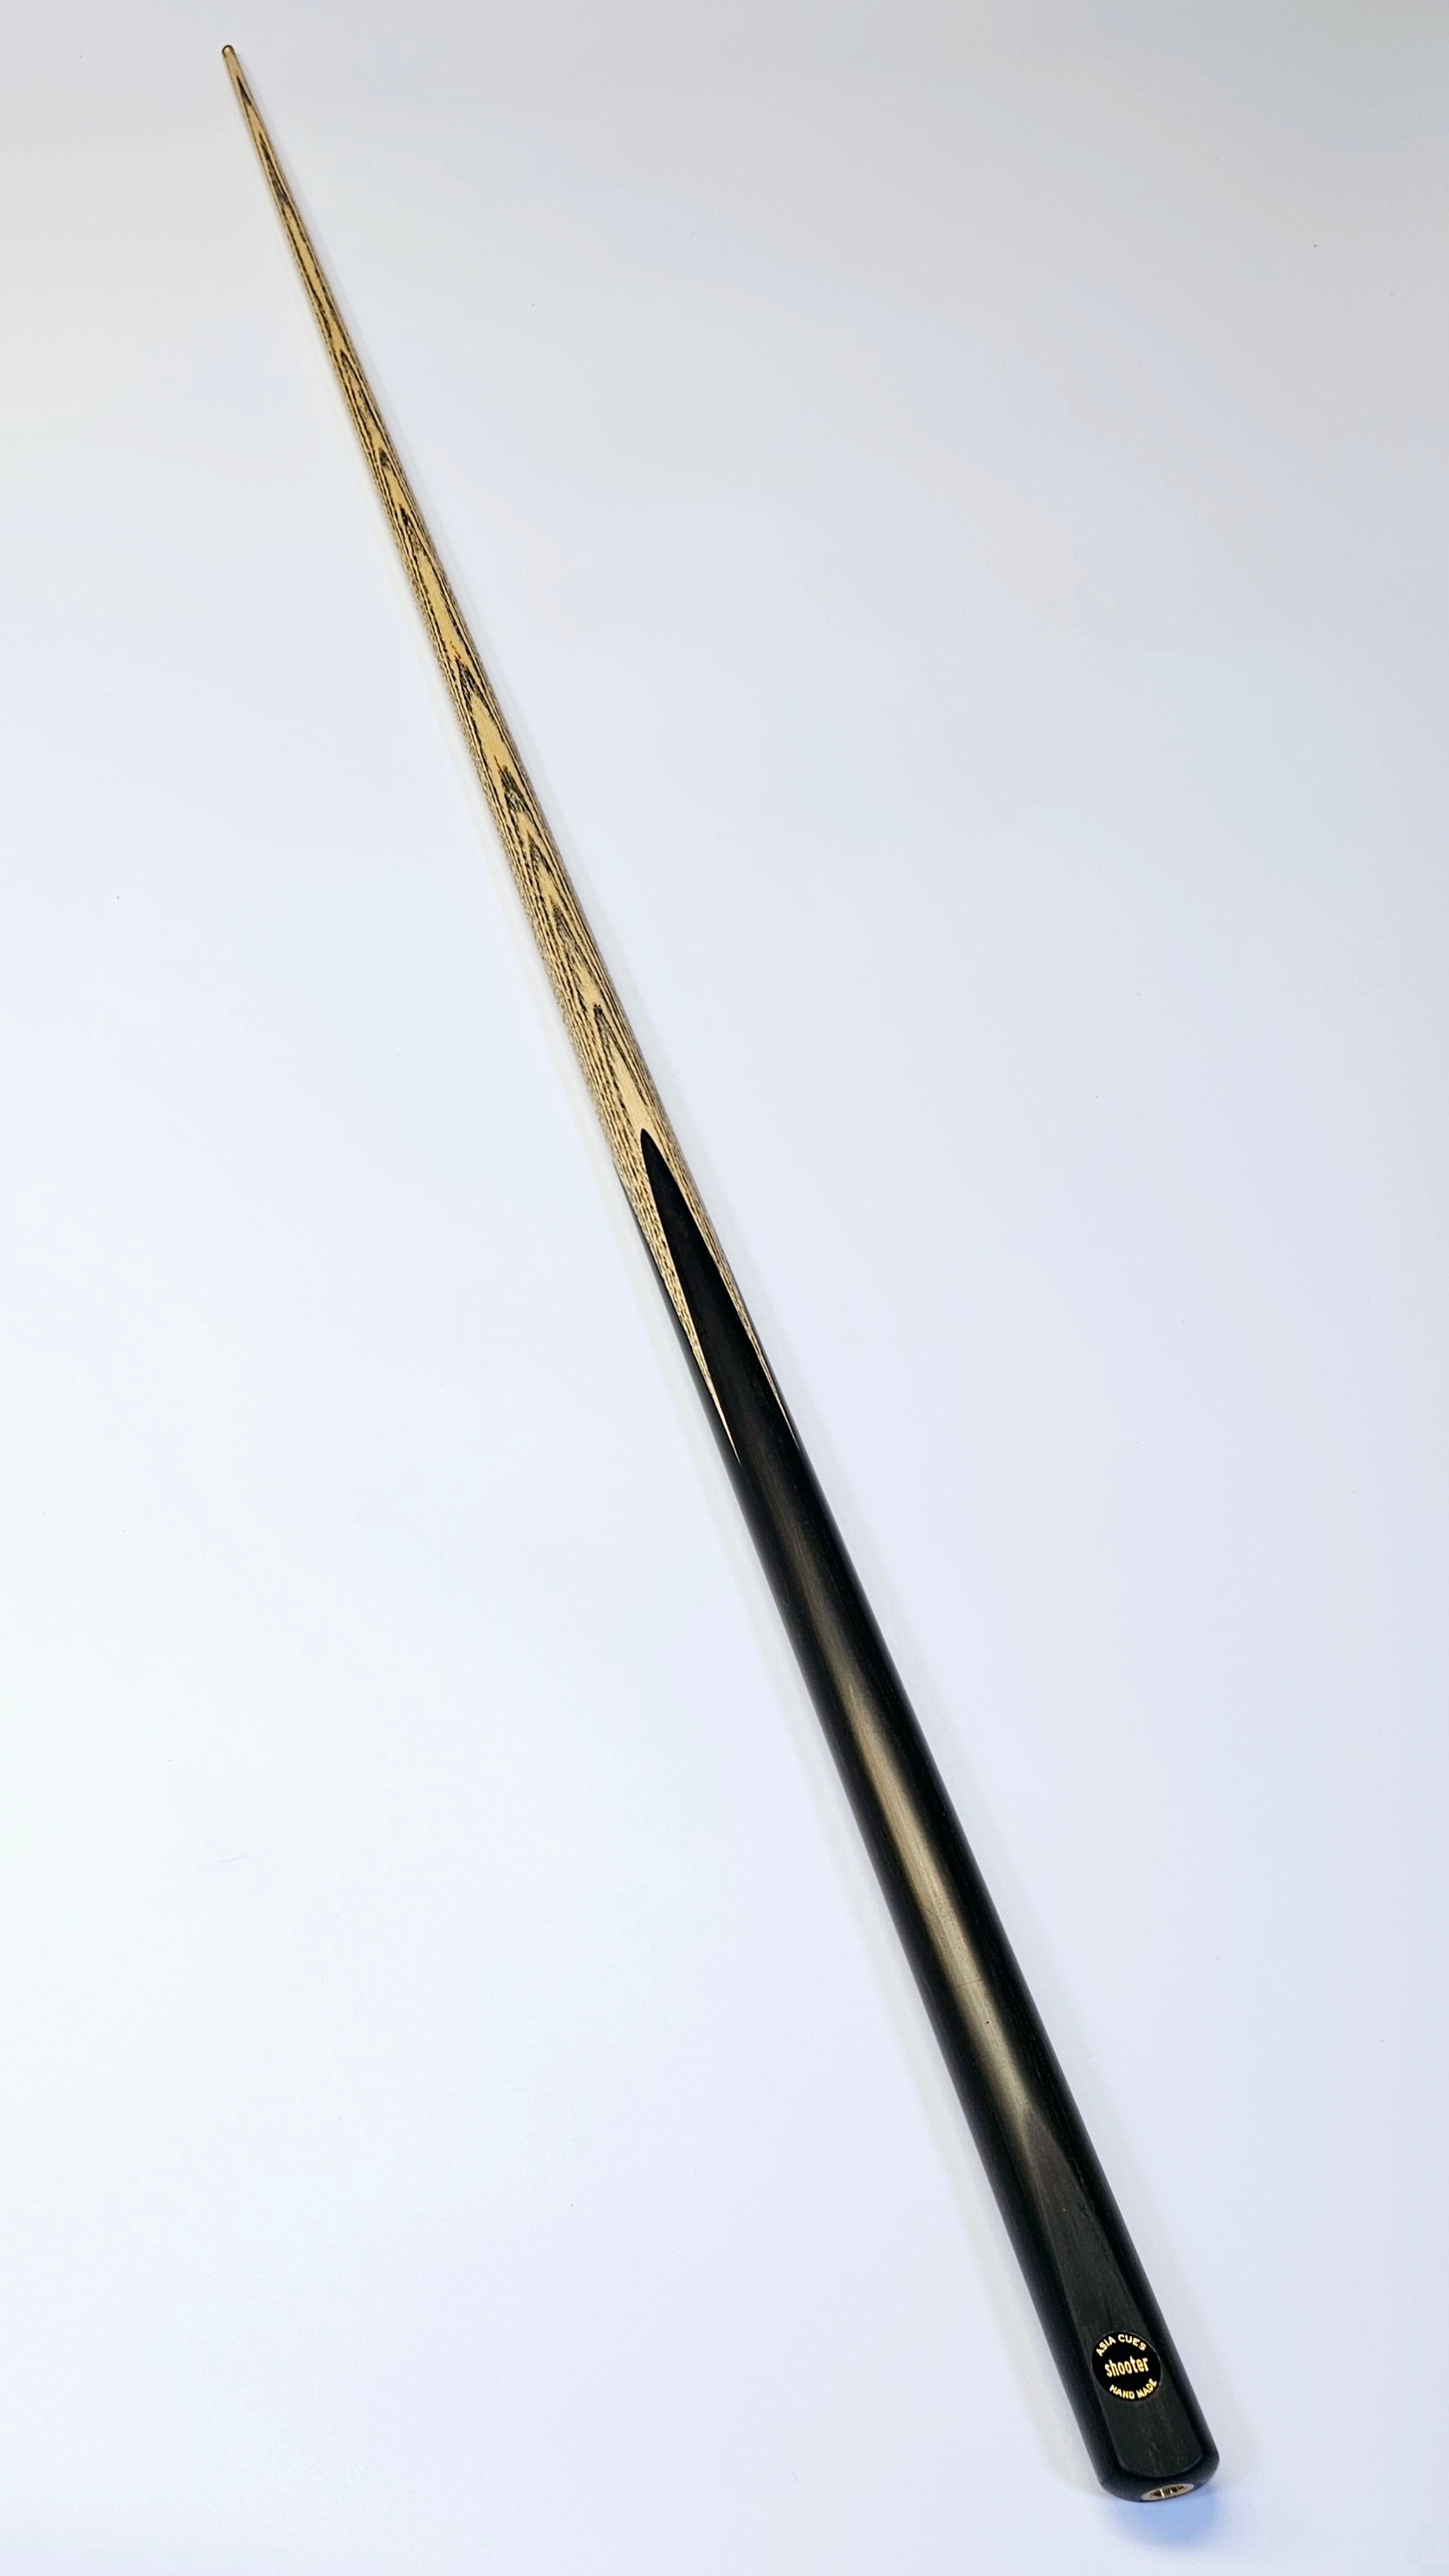 Asia Cues Shooter - One Piece Pool Cue 8.6mm Tip, 17.8oz, 58"